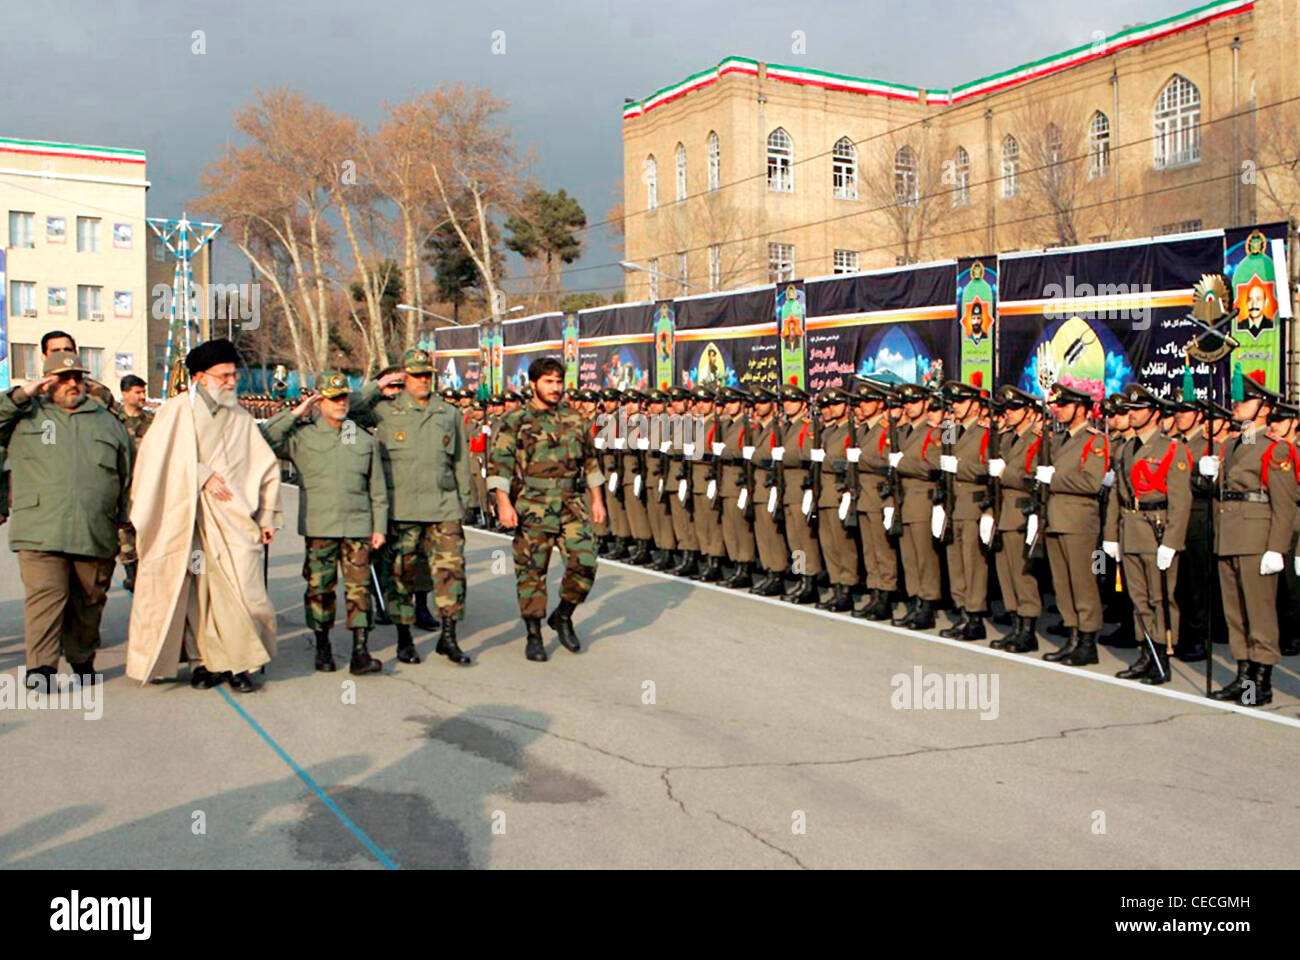 Spiritual Leader of the Islamic Republic of Iran and Commander of the army Ayatollah Khamenei at a parade of the Iranian army. Stock Photo